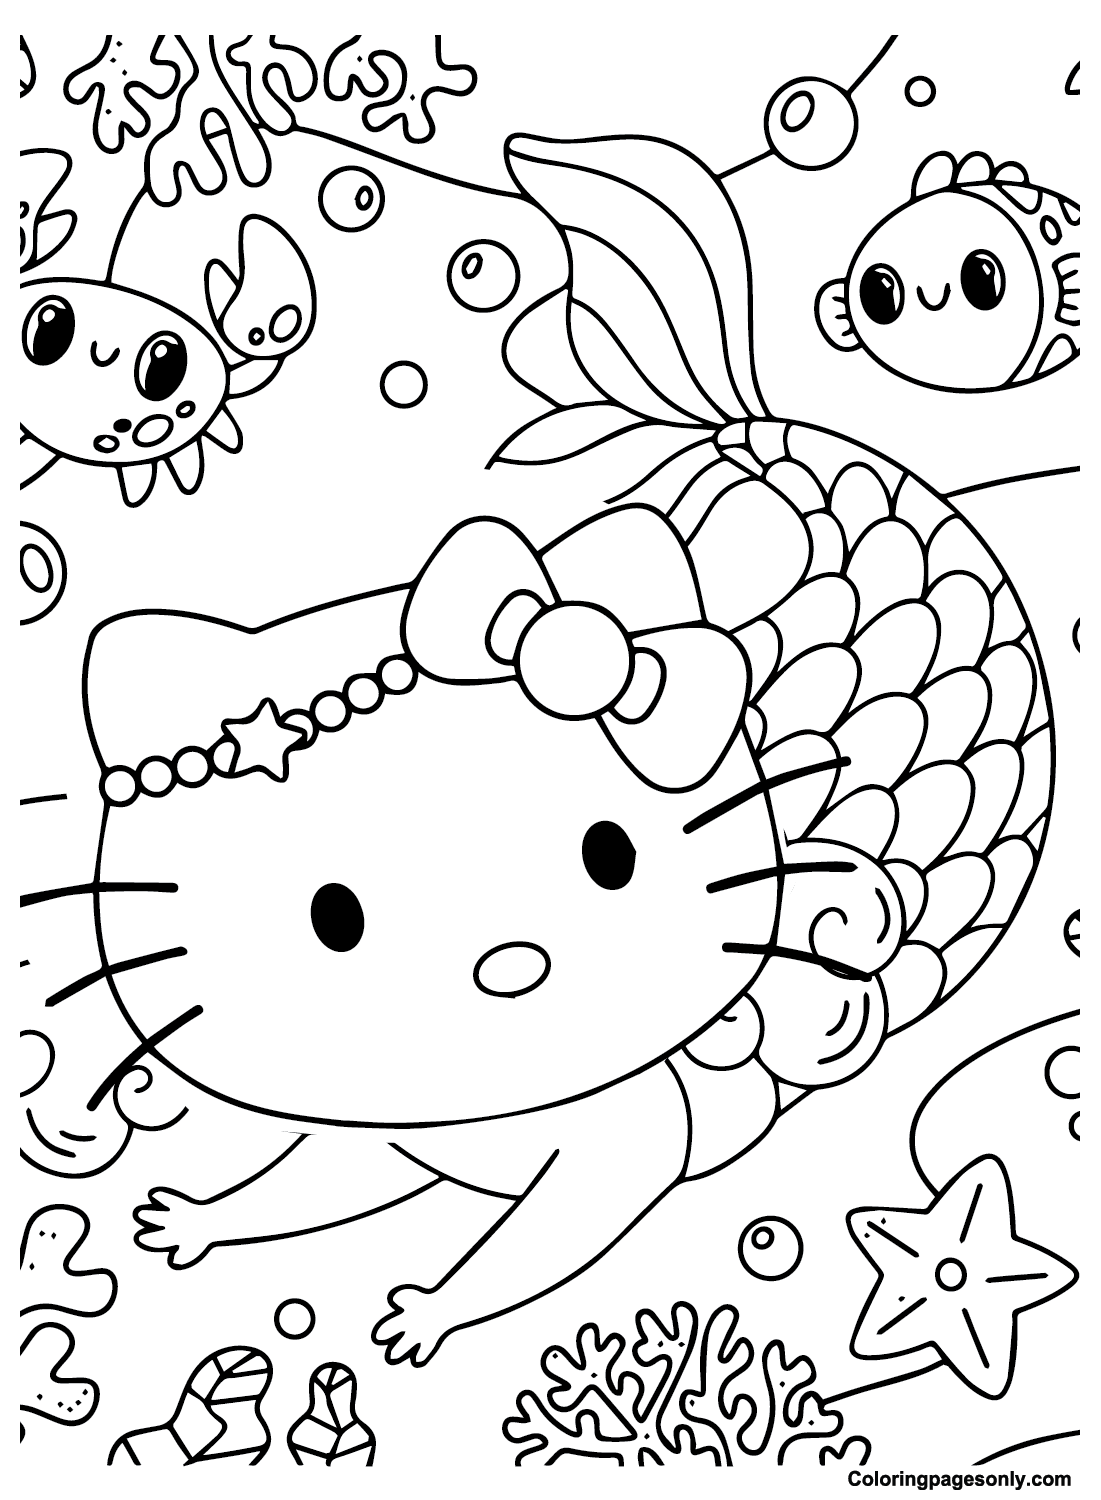 Adorable Hello Kitty Mermaid Coloring Pages